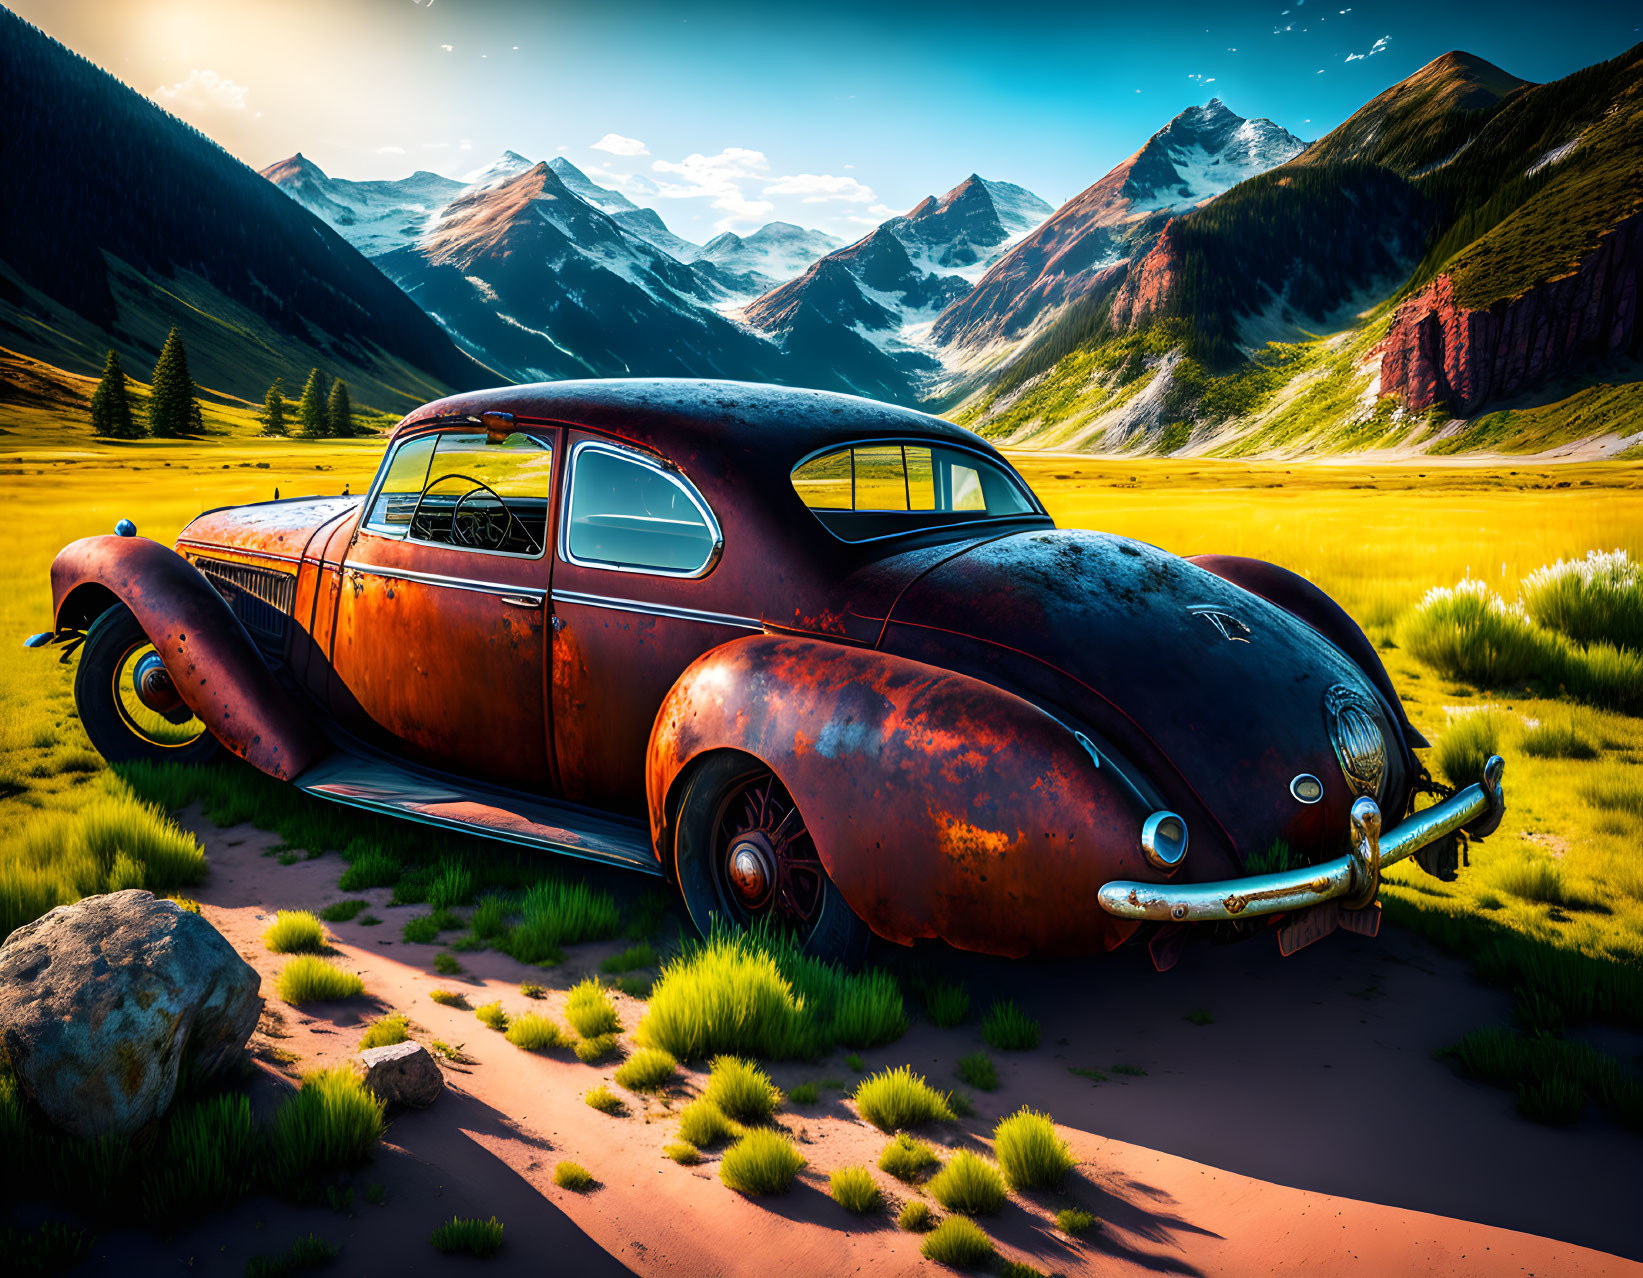 Rusted car in vibrant field with mountains and blue sky